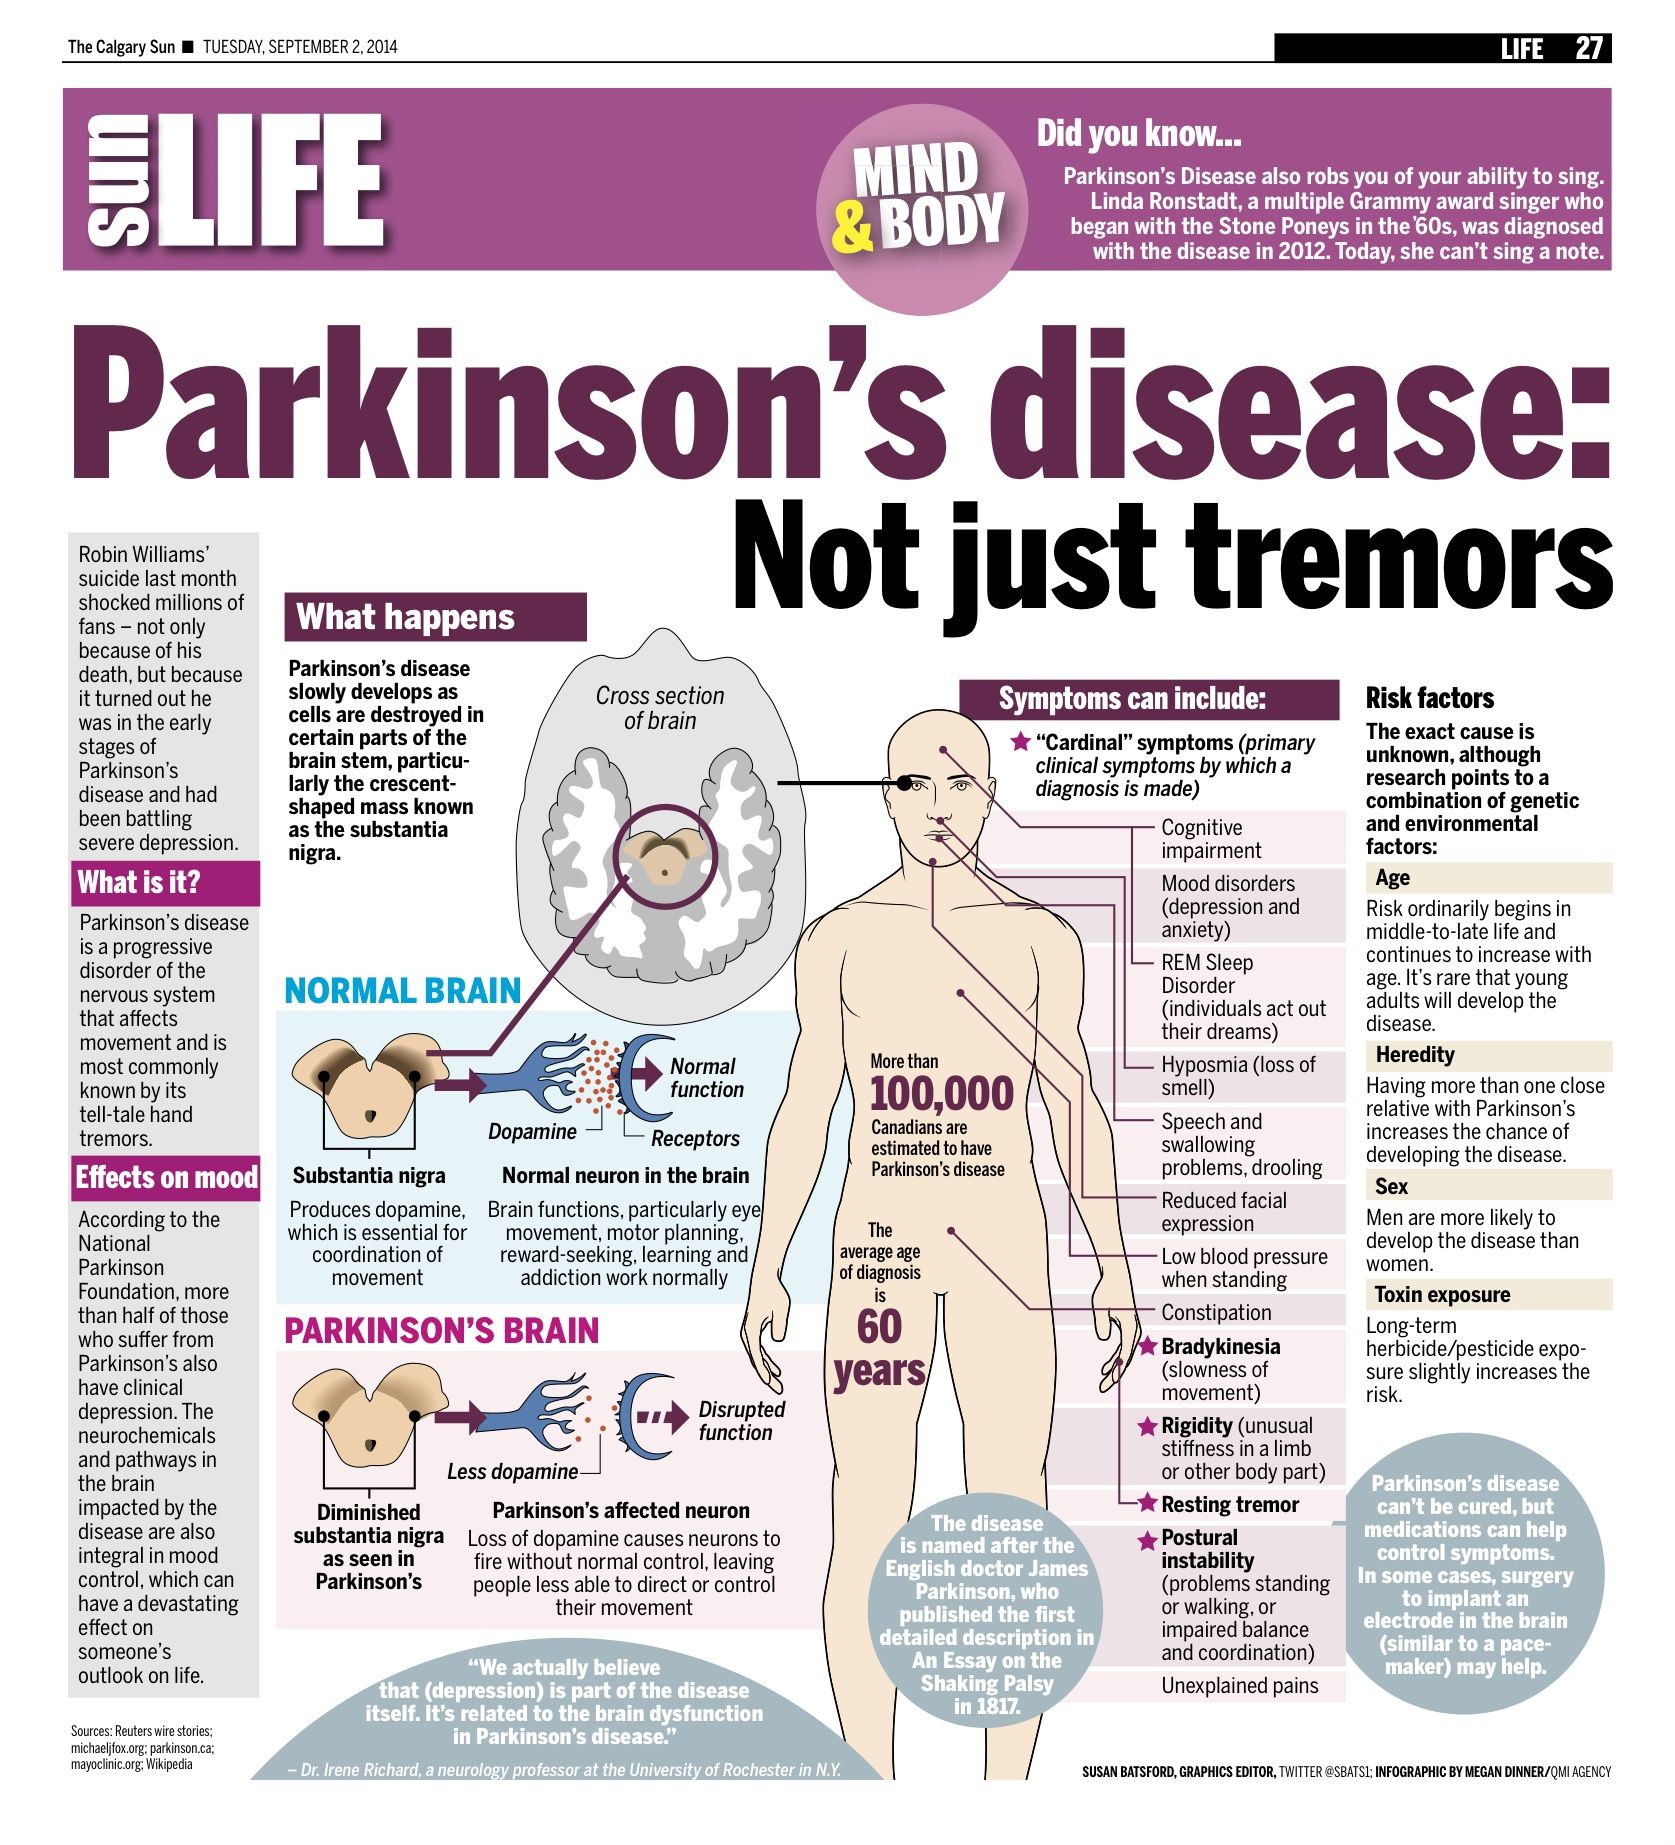 What Are The Early Stages Of Parkinson